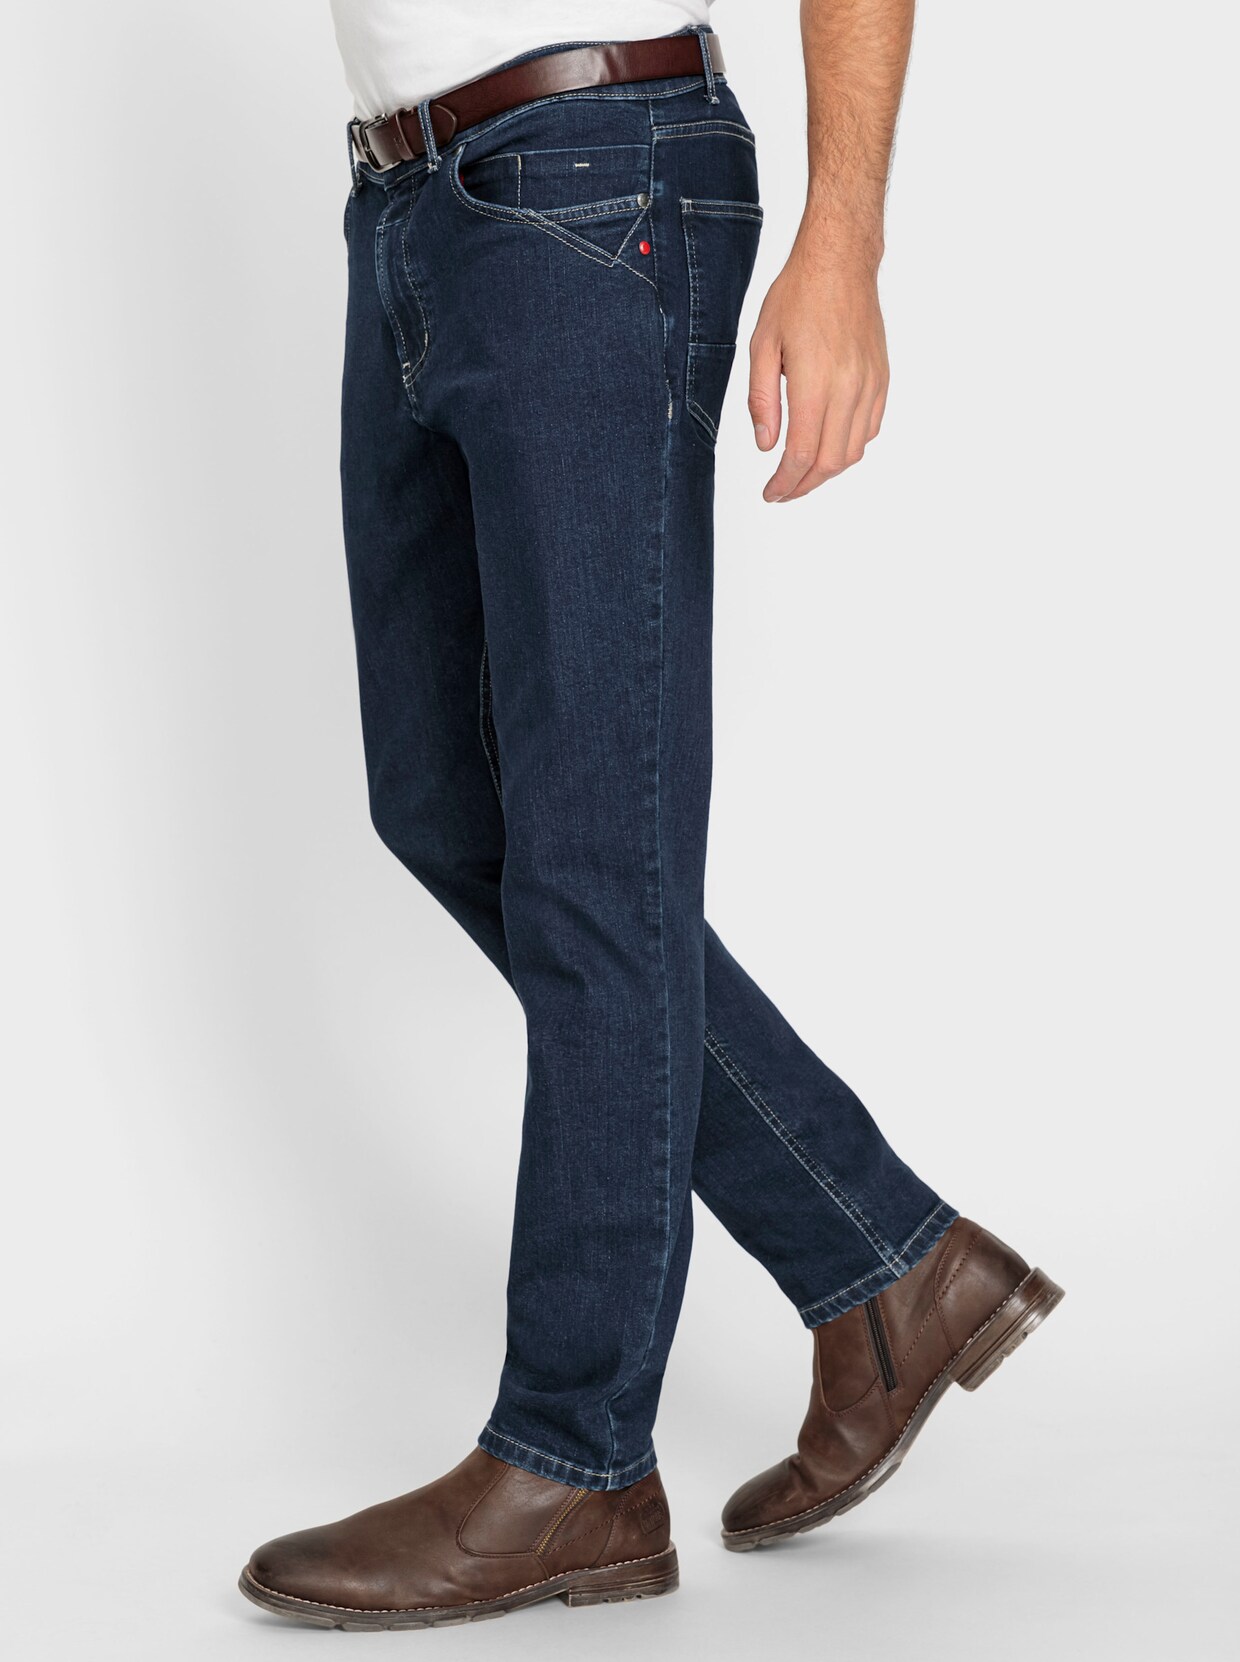 Jeans - darkblue stone-washed